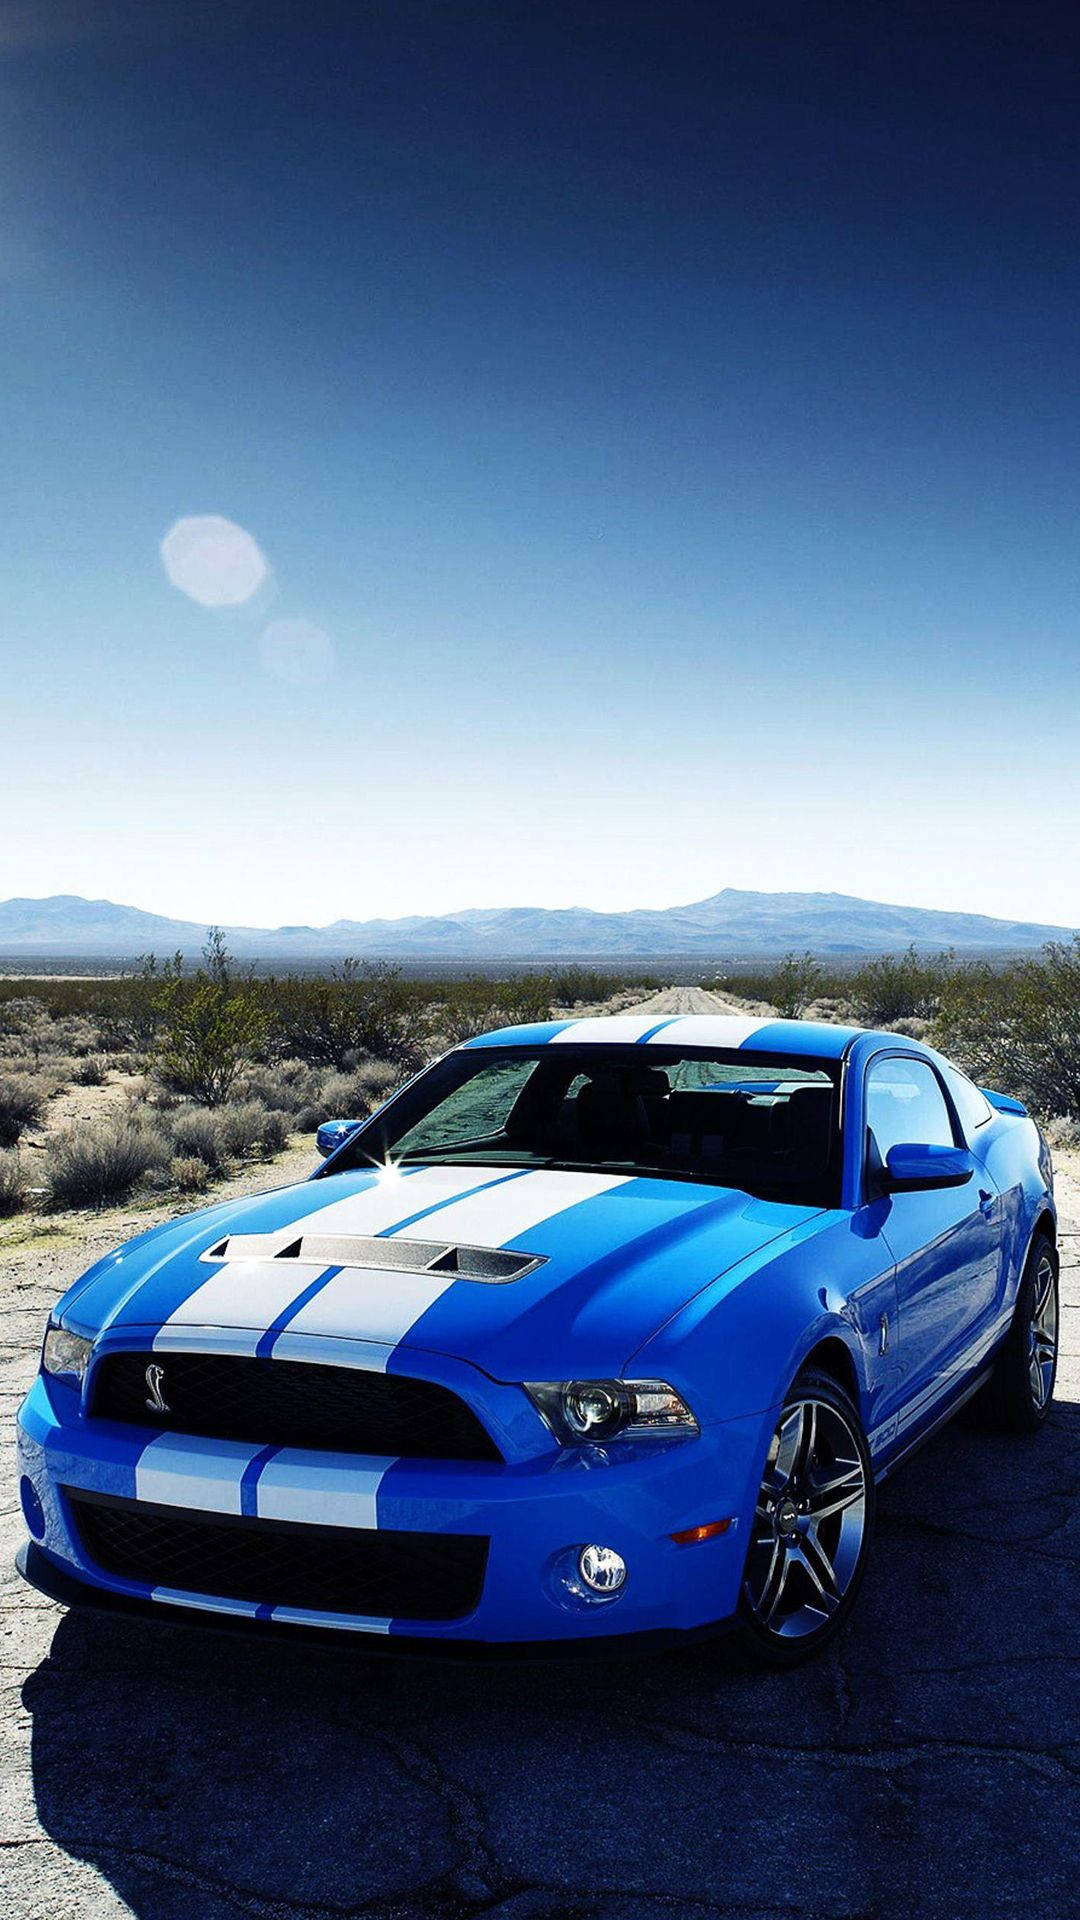 Iphone X Car Blue Shelby Mustang